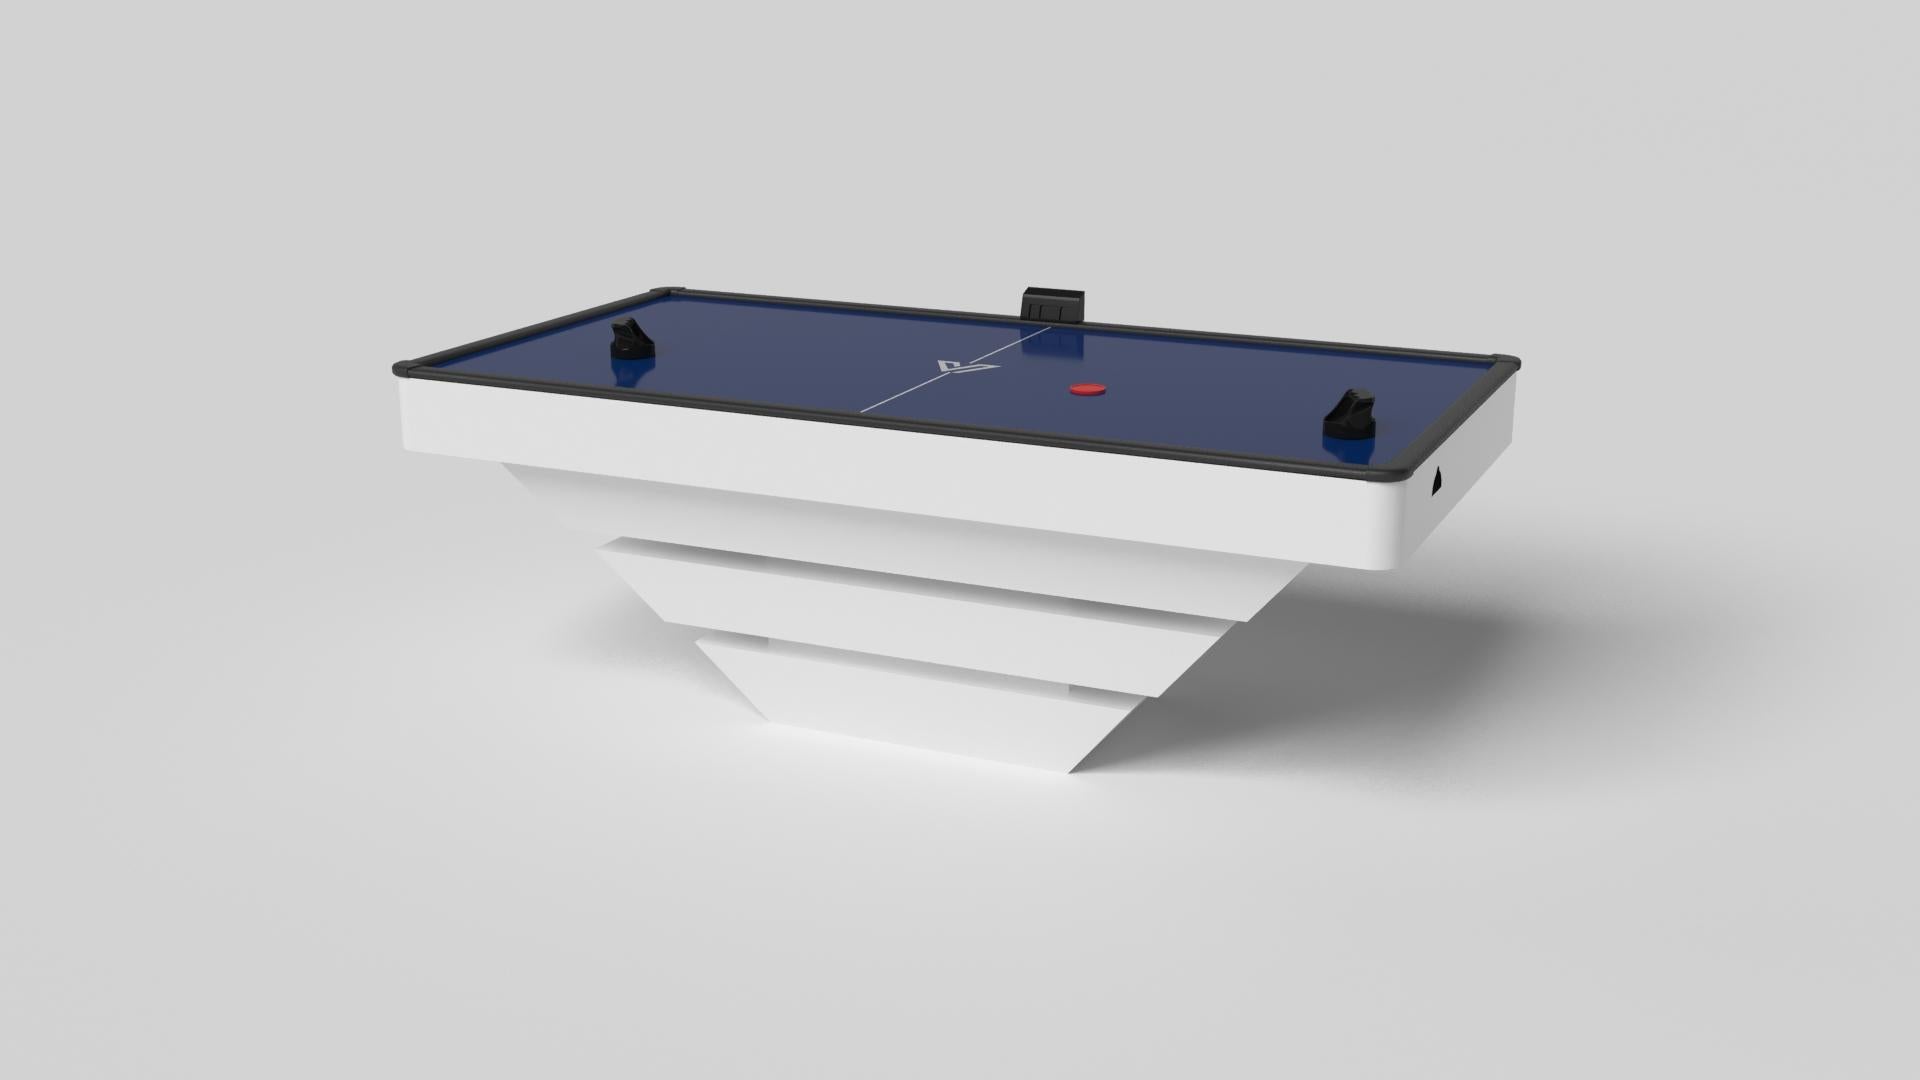 Three solid pieces of wood seemingly float around a concealed center base, making the Louve air hockey in chrome one of our most mind-bending designs. Crafted from solid metal, this contemporary table features a smooth finish with a tapered base